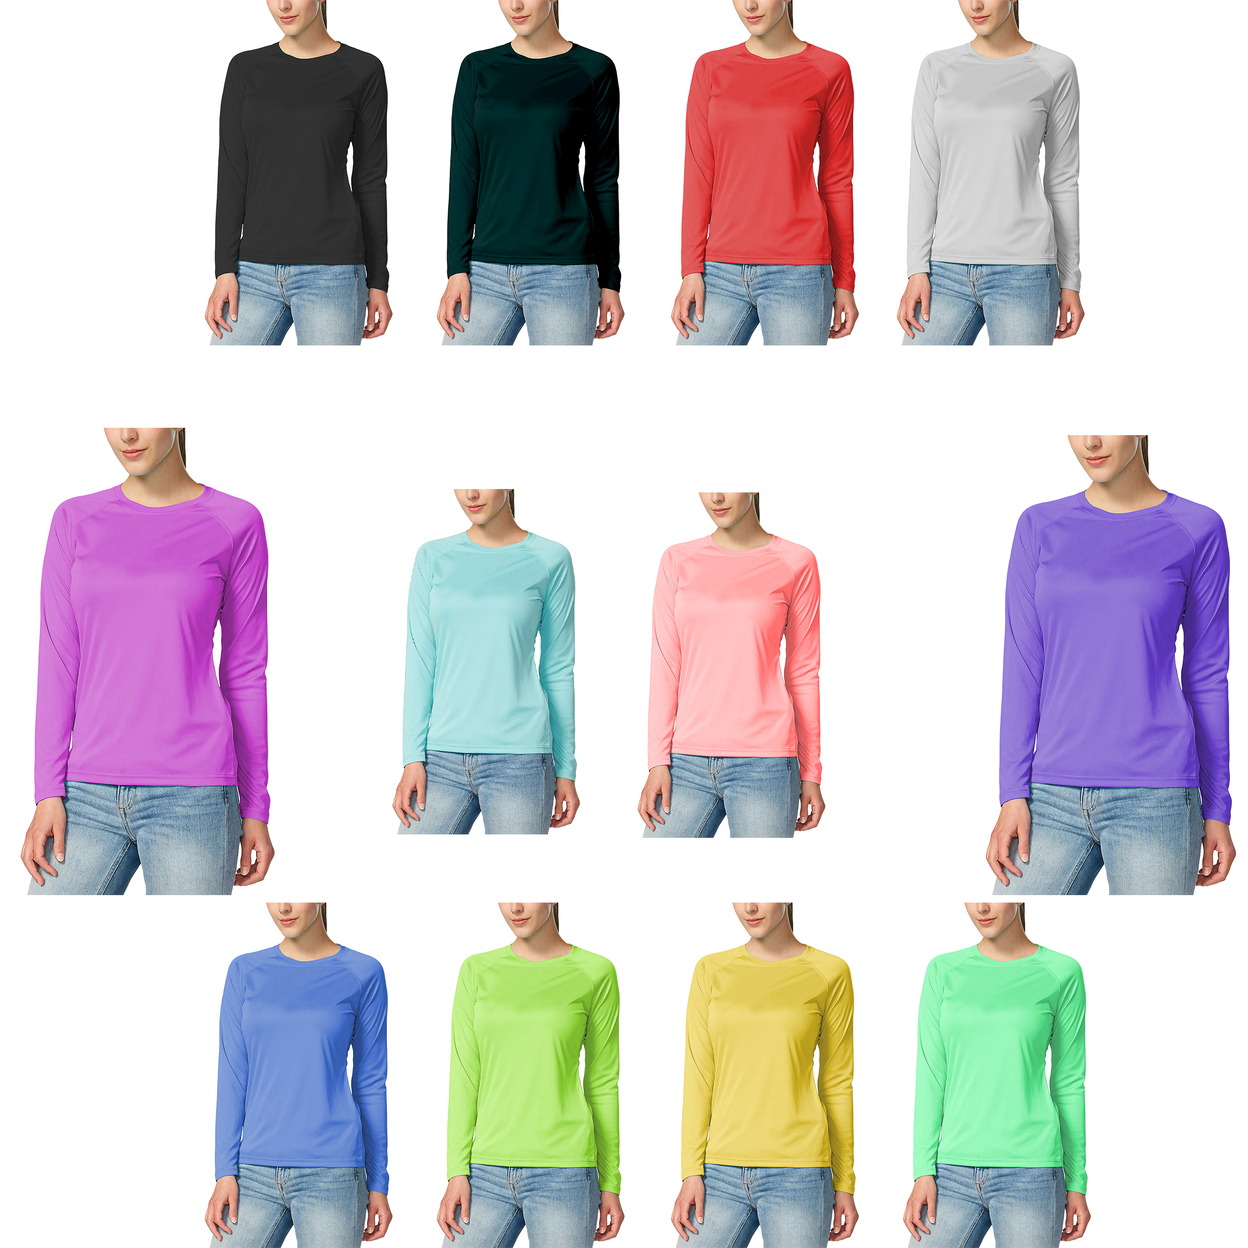 Multi-Pack: Women's Dri-Fit Moisture-Wicking Breathable Long Sleeve T-Shirt - 3-pack, Large